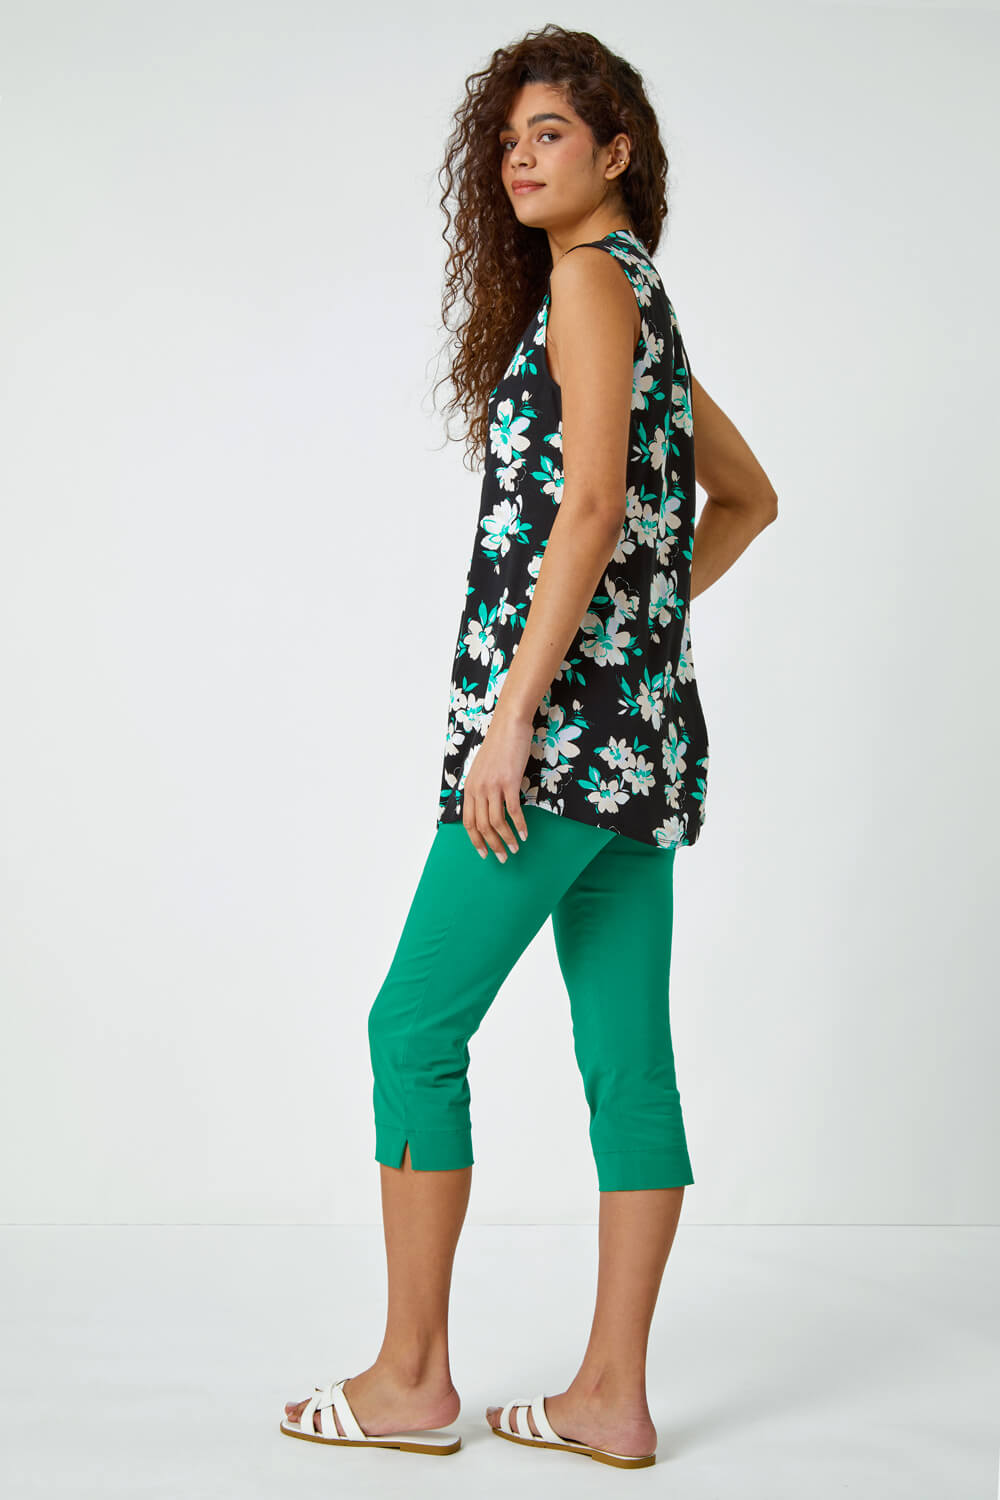 Green Sleeveless Floral Print Smock Top, Image 3 of 5